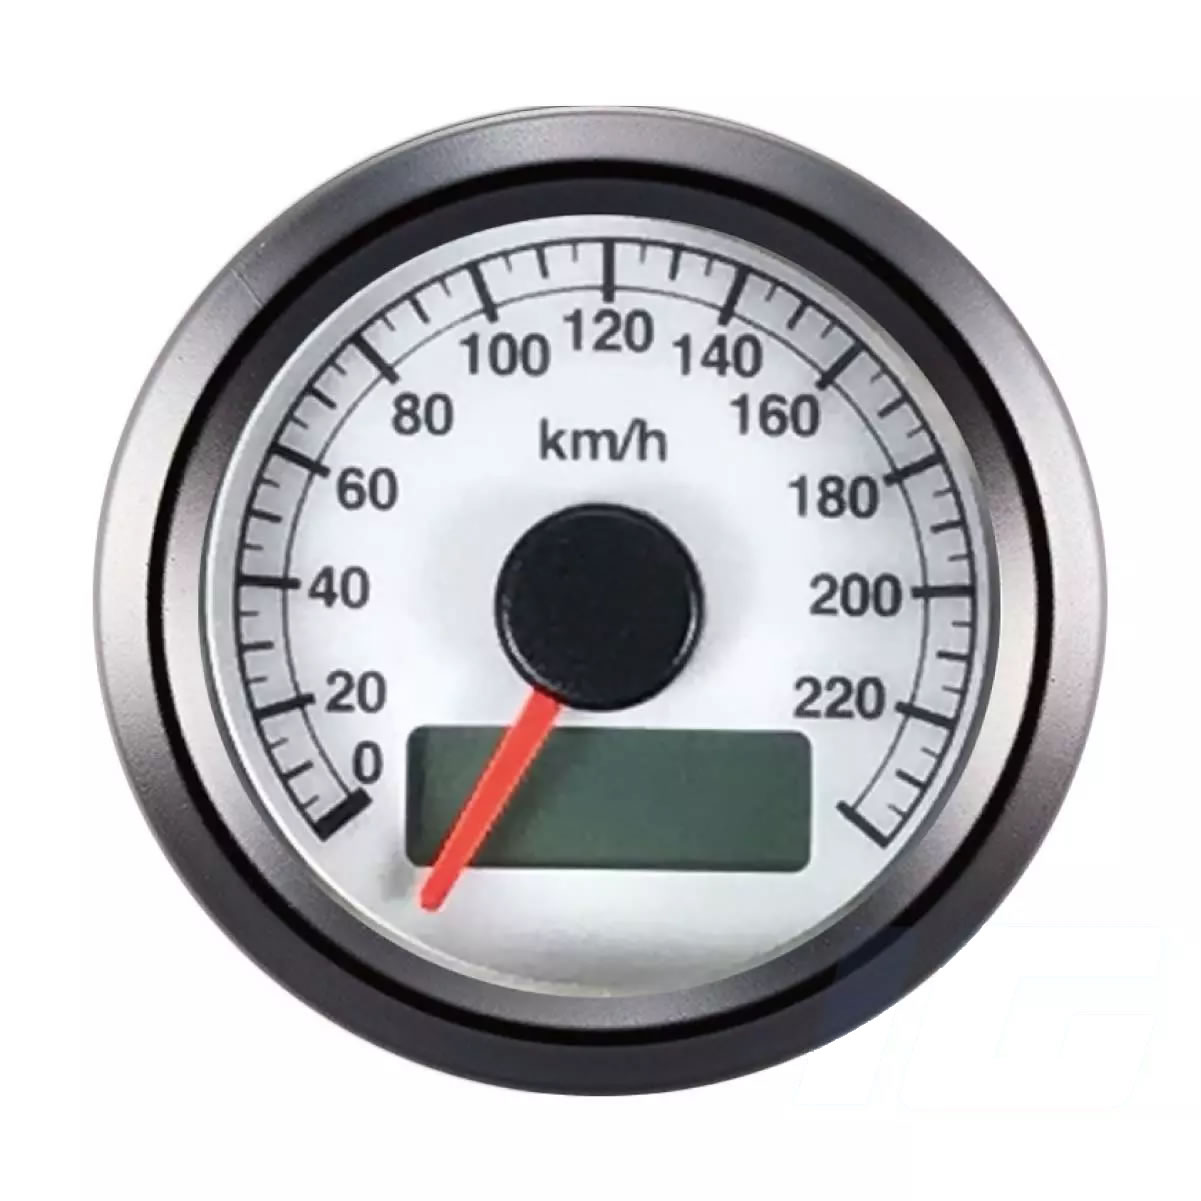 48mm White Face Universal Aftermarket Gauge – Electronic Speedometer for Motorcycle